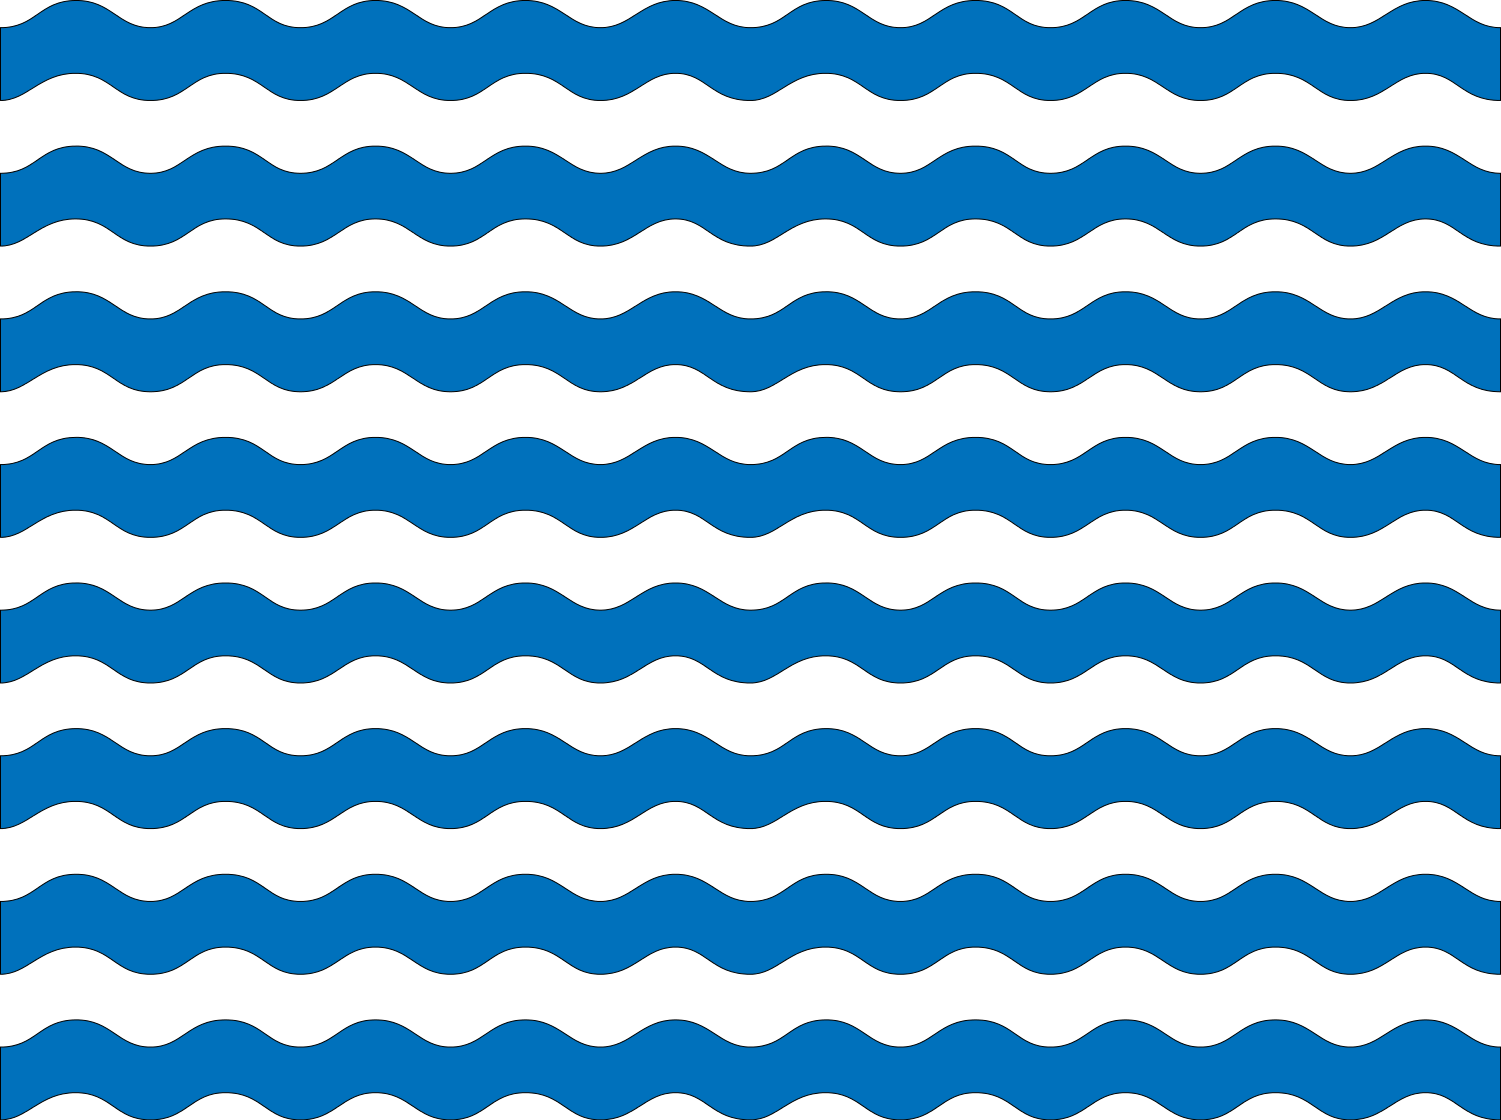 Clip Arts Related To : Wave Line Clip Art Clipart Of Wavy Lines. view all.....